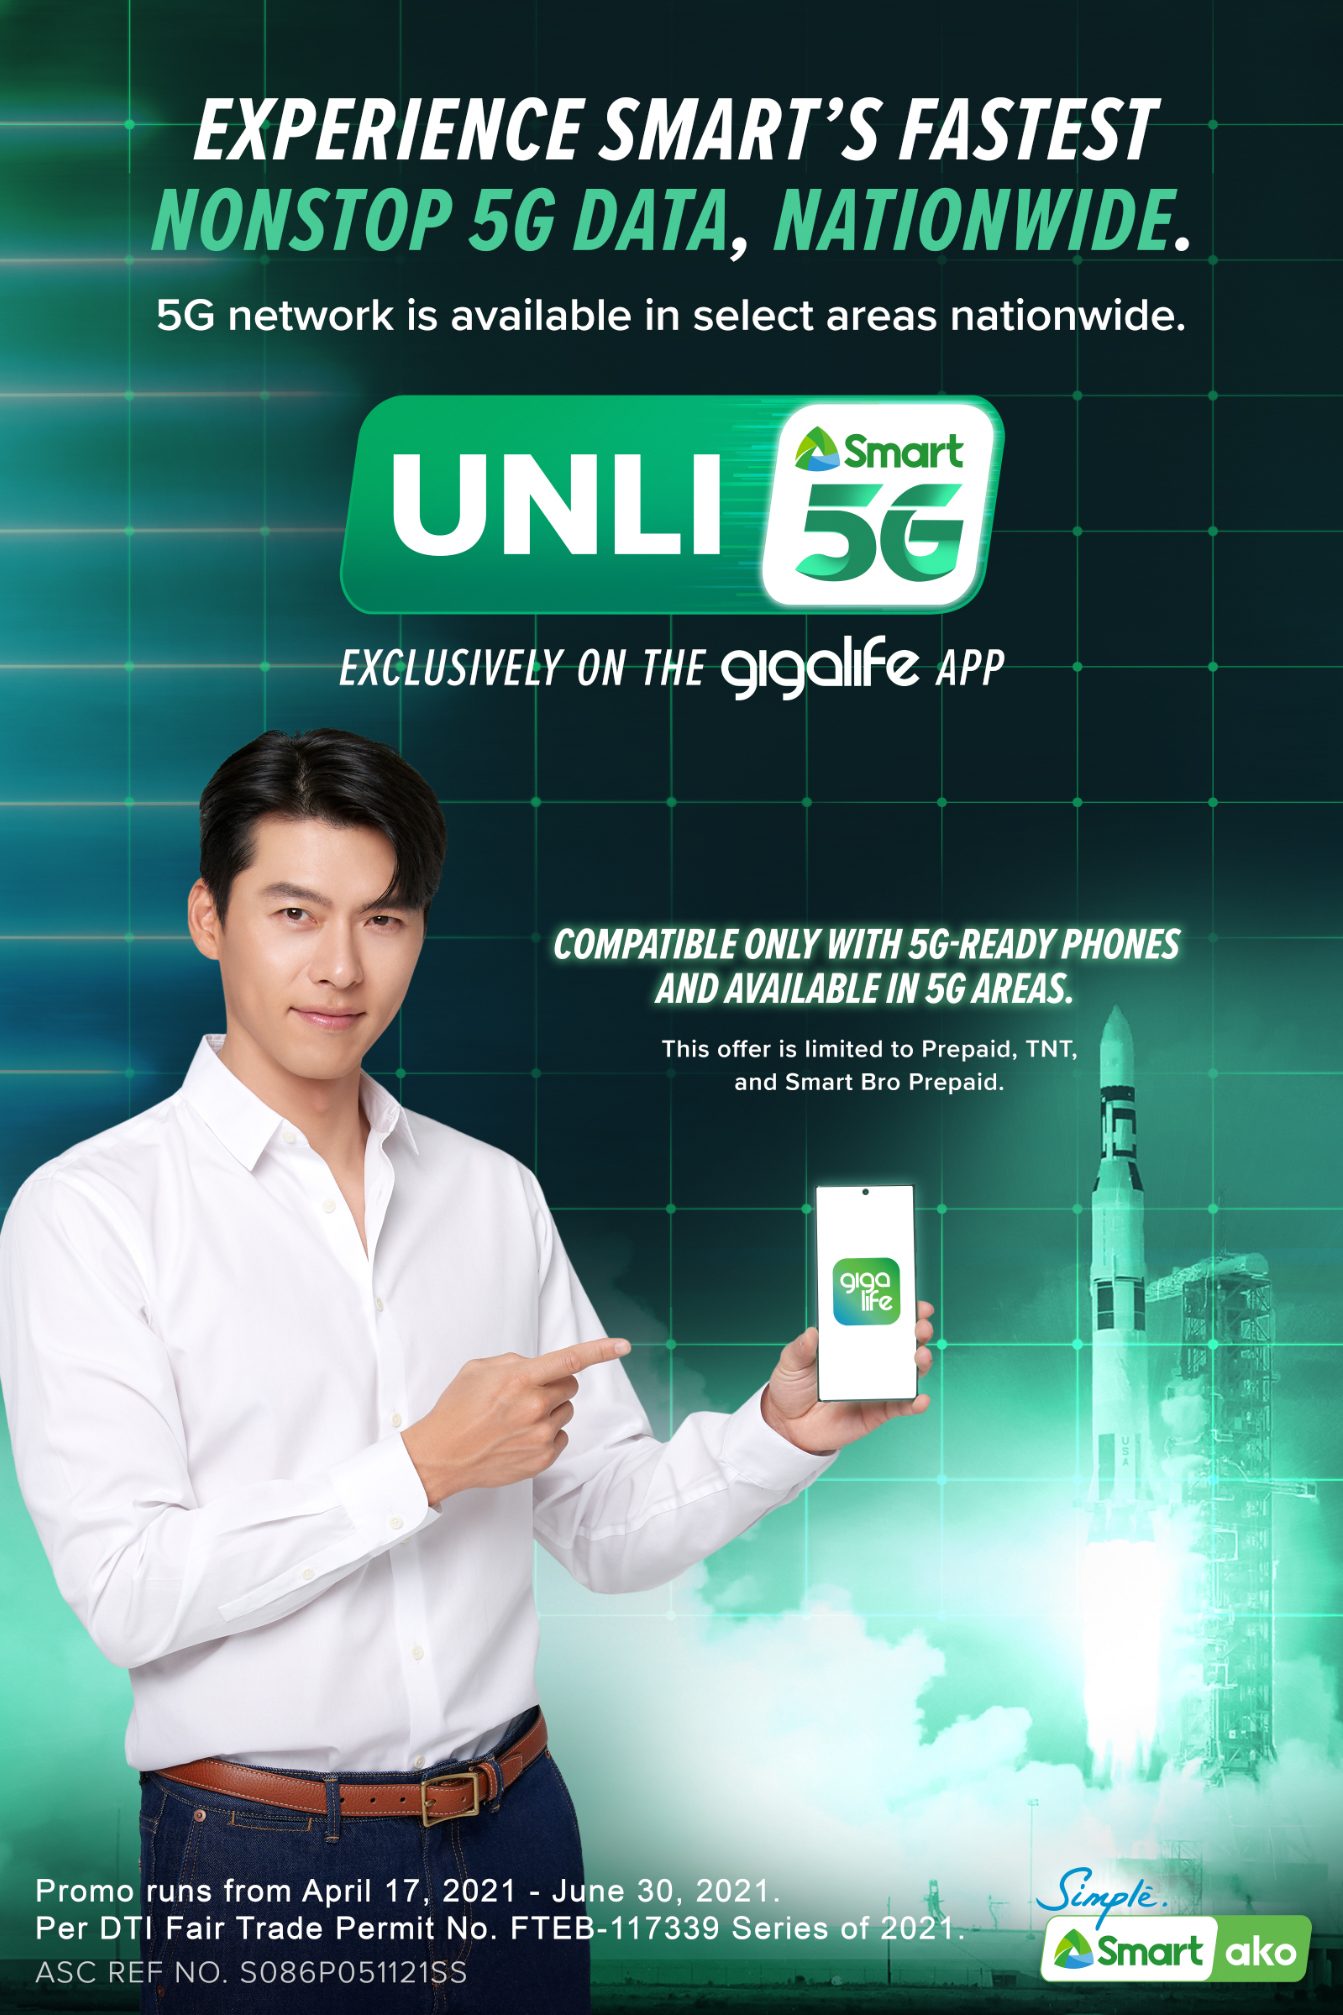 Smart makes Unli 5G available to all 5G-covered sites in the Philippines